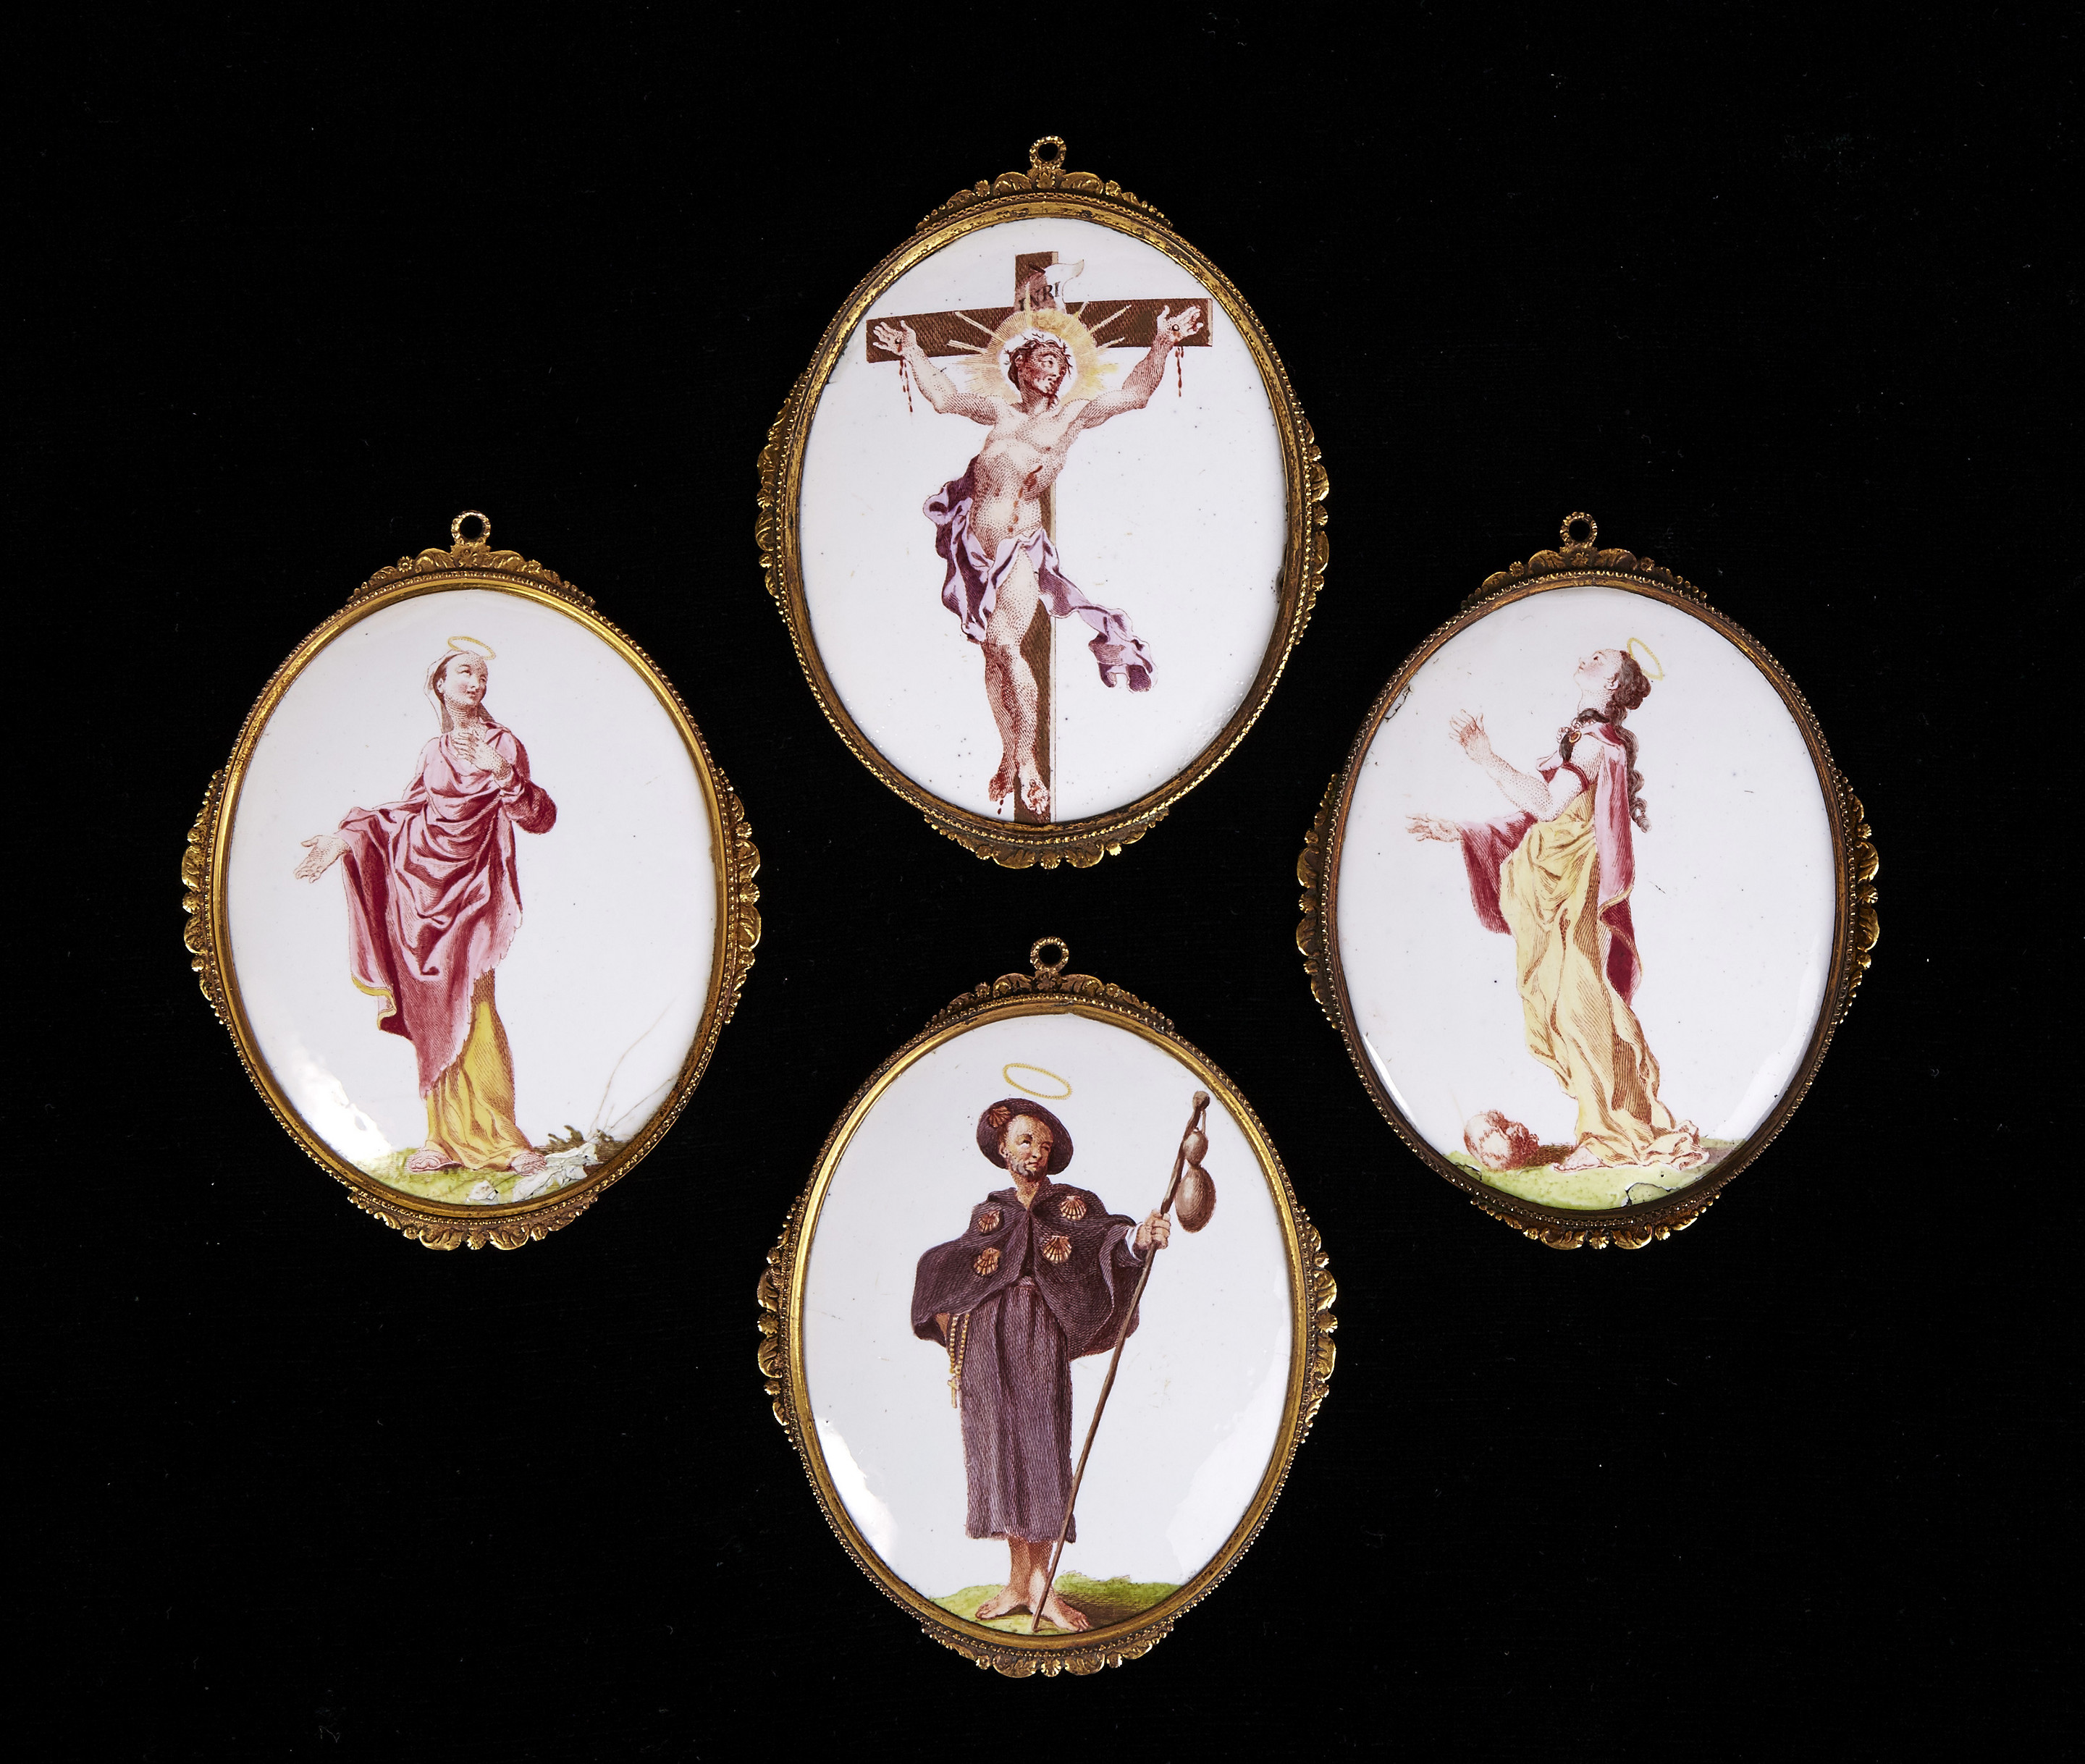 A Group of Four Battersea Enamel Oval Religious Plaques